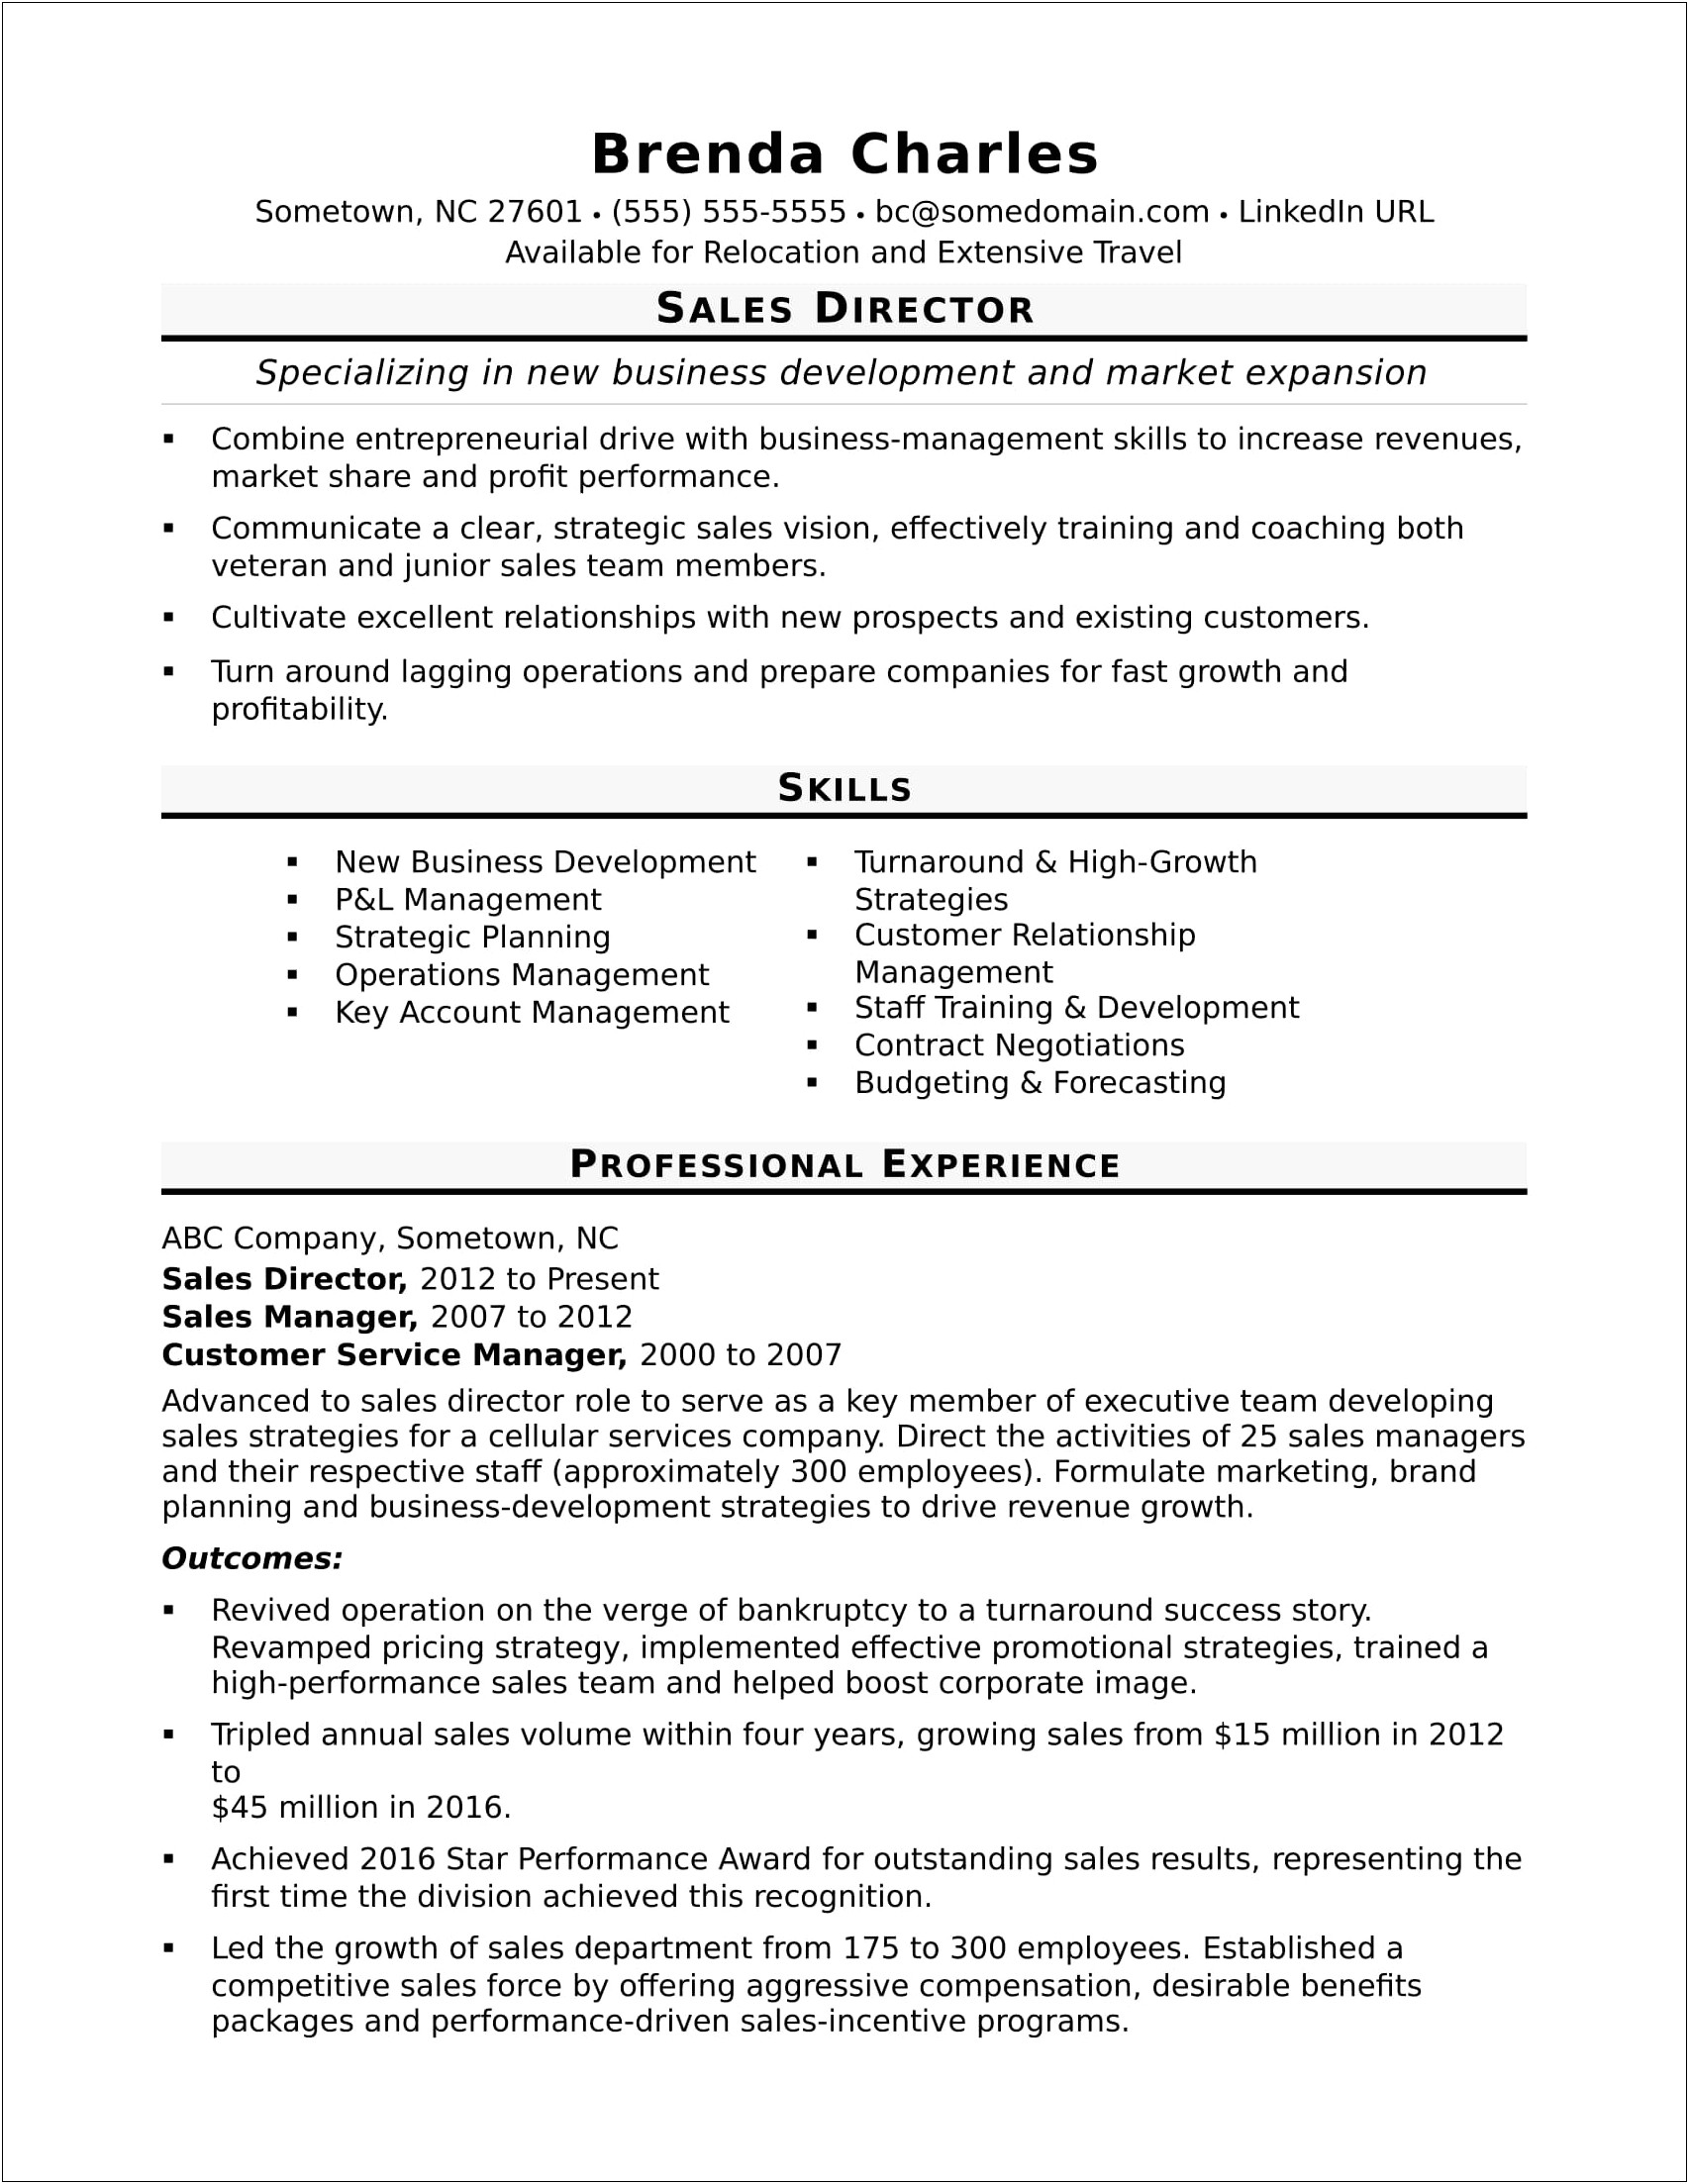 Free Resume Samples For Sales And Marketing